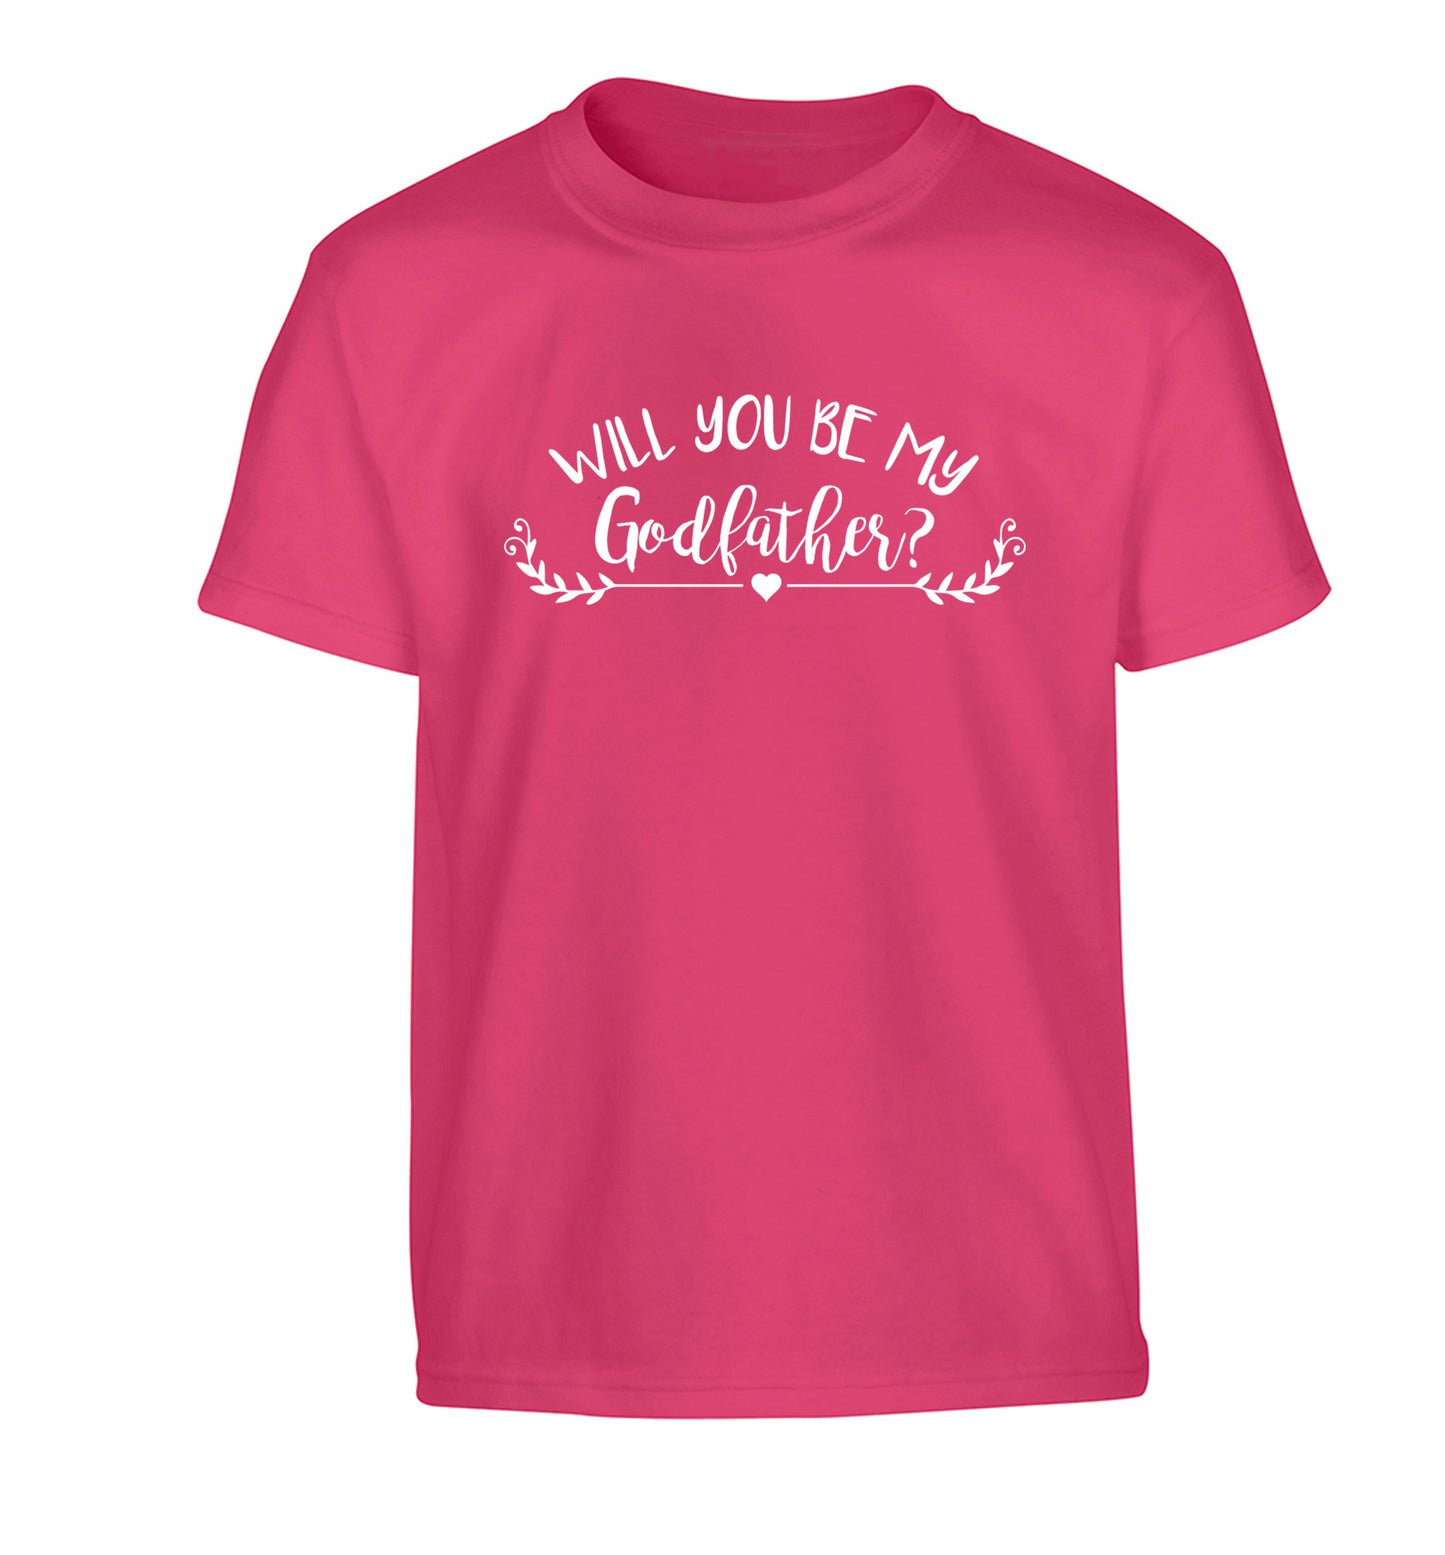 Will you be my godfather? Children's pink Tshirt 12-14 Years